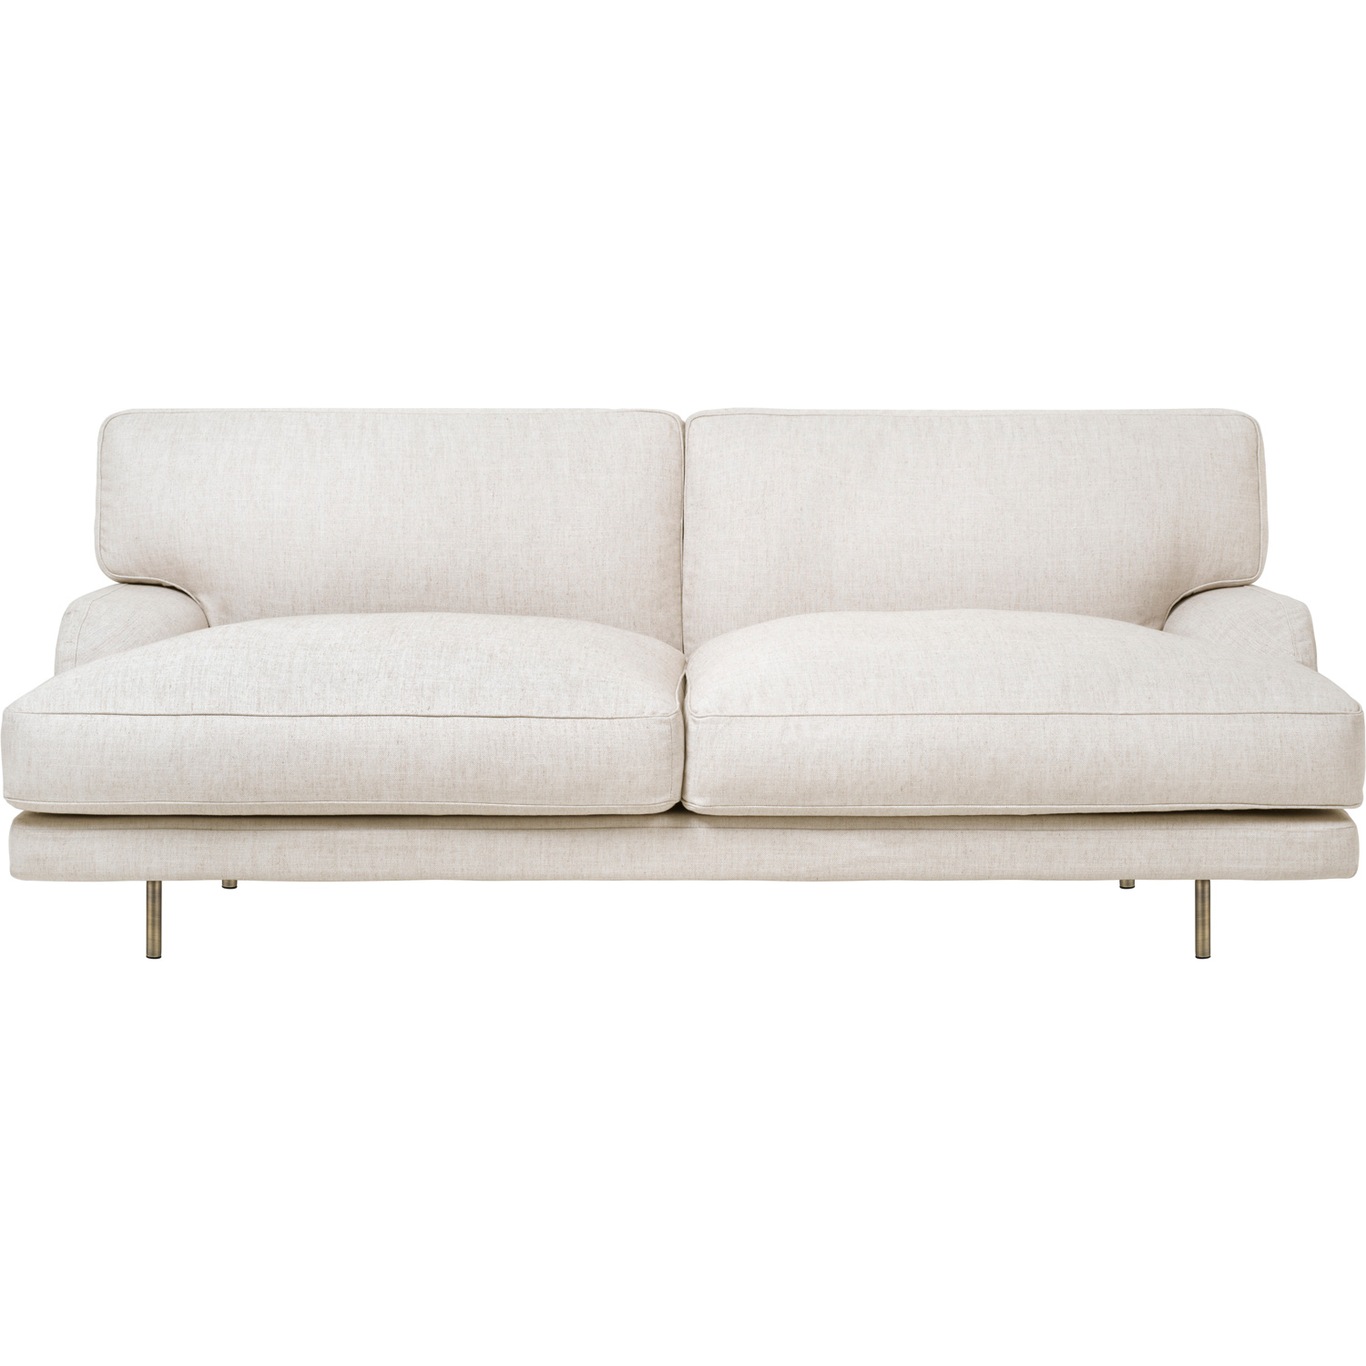 Flaneur Sofa LC 2-Pers, Ben Messing / Hot Madison 419 Off White